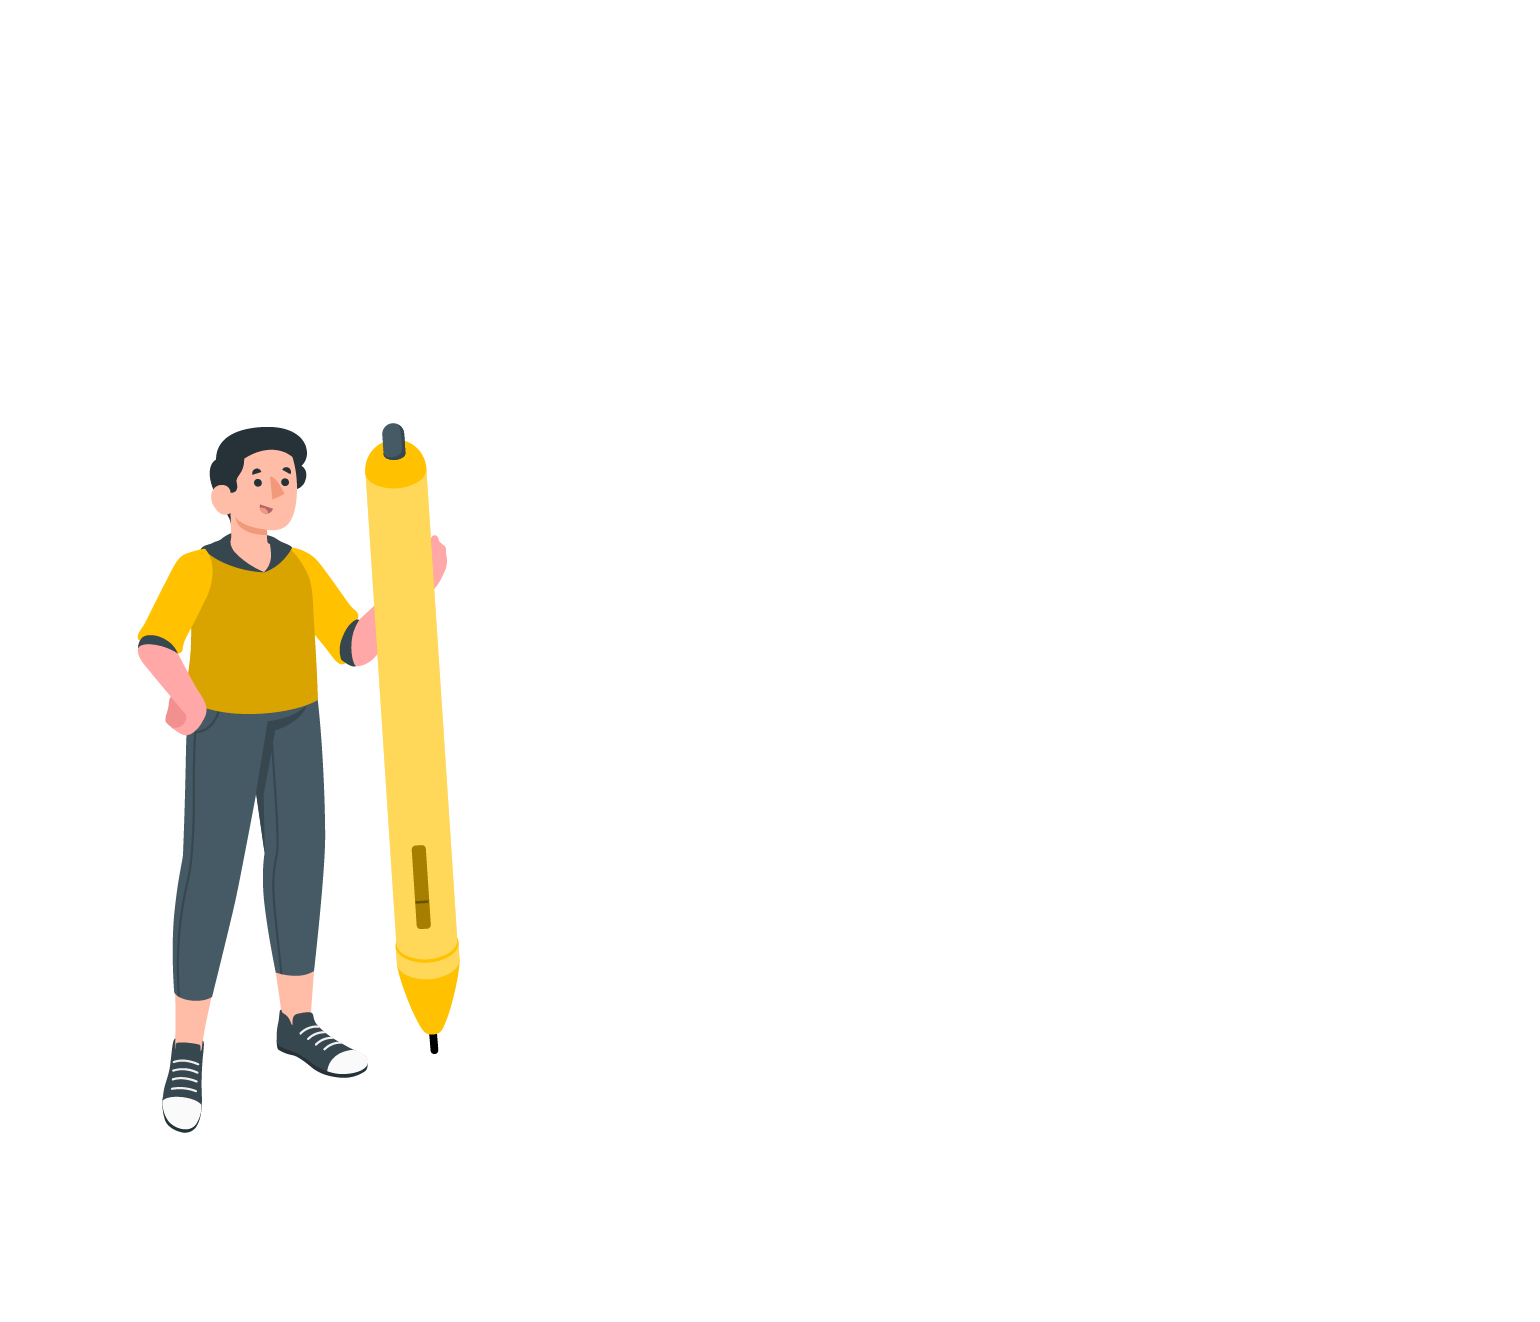 hooman with life size yellow pen illustration